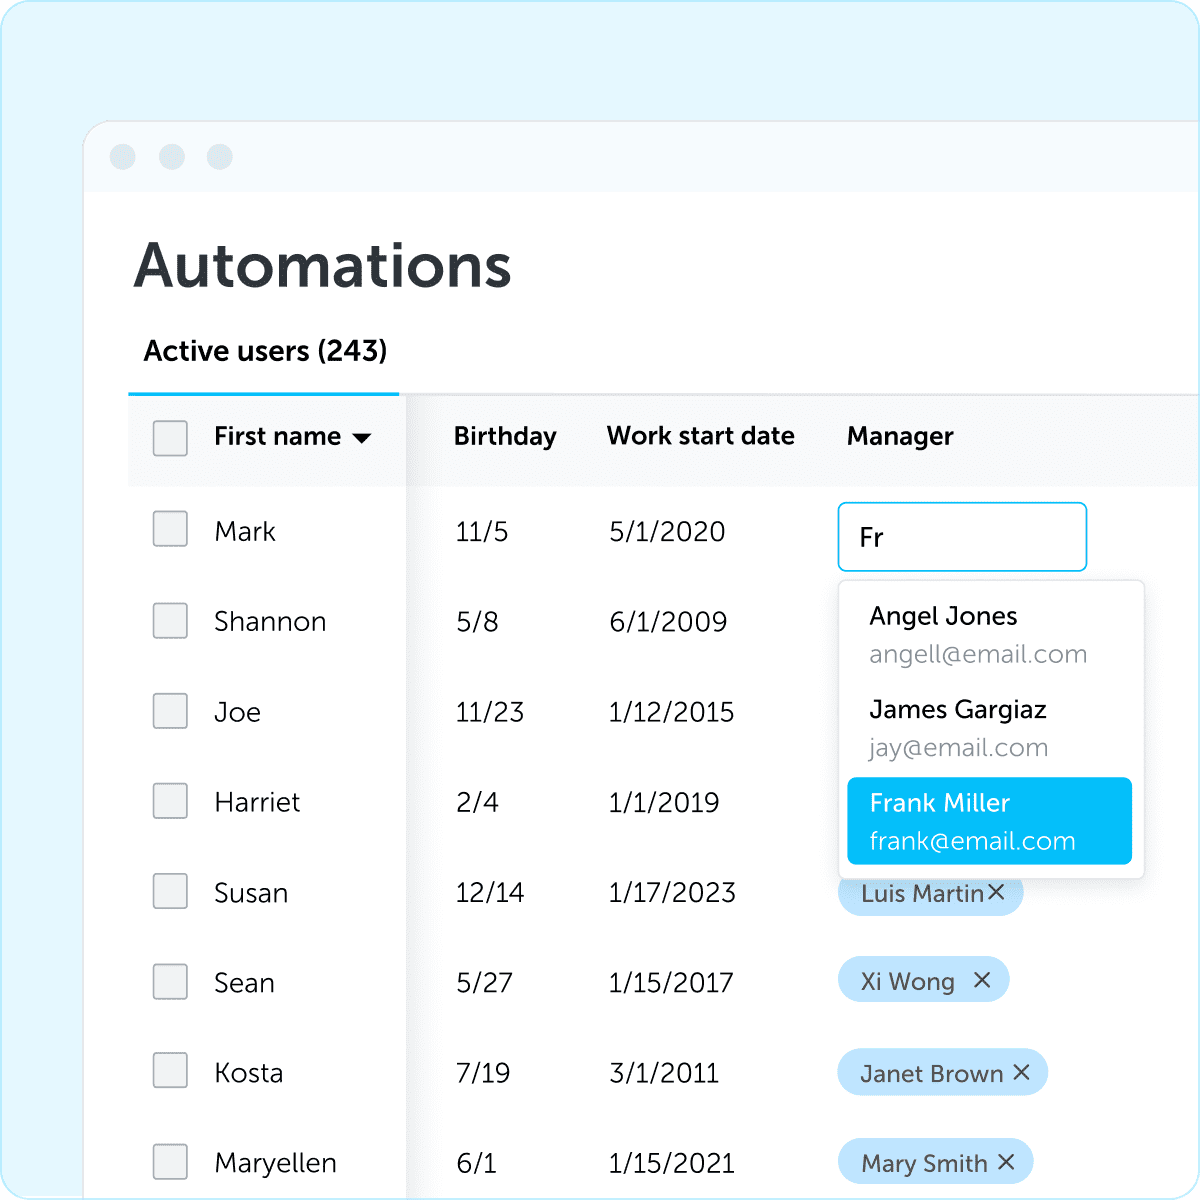 Web browser with active users list and birthdays, start date, and manager from automations screen